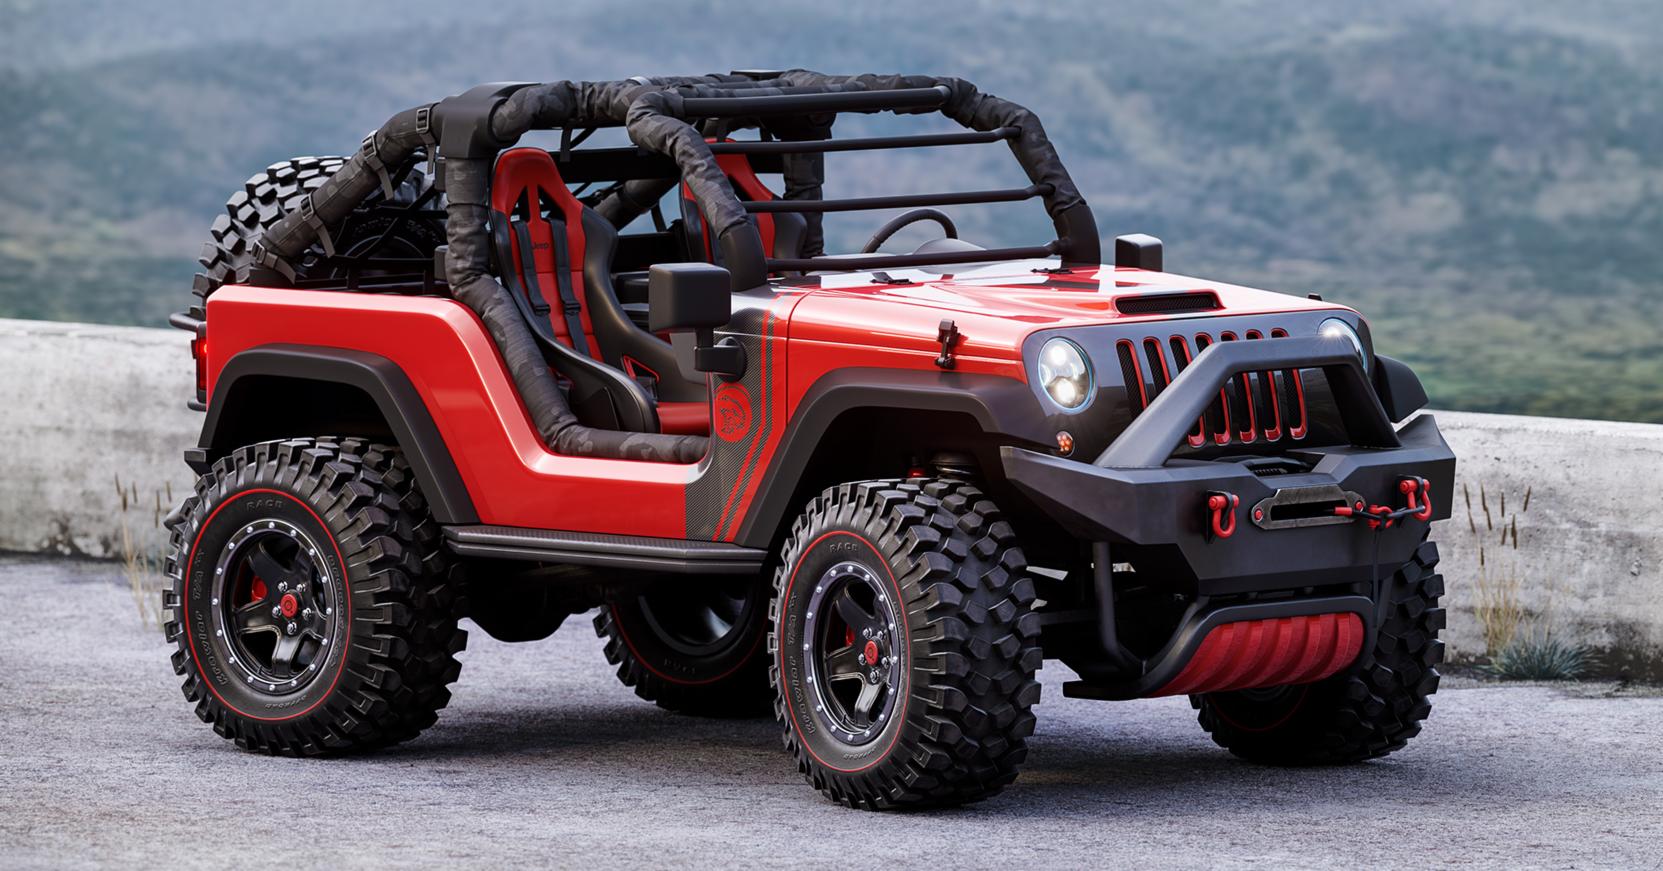 This 'Jeep Shortcut' Concept Is The OffRoad 4x4 You've Been Waiting